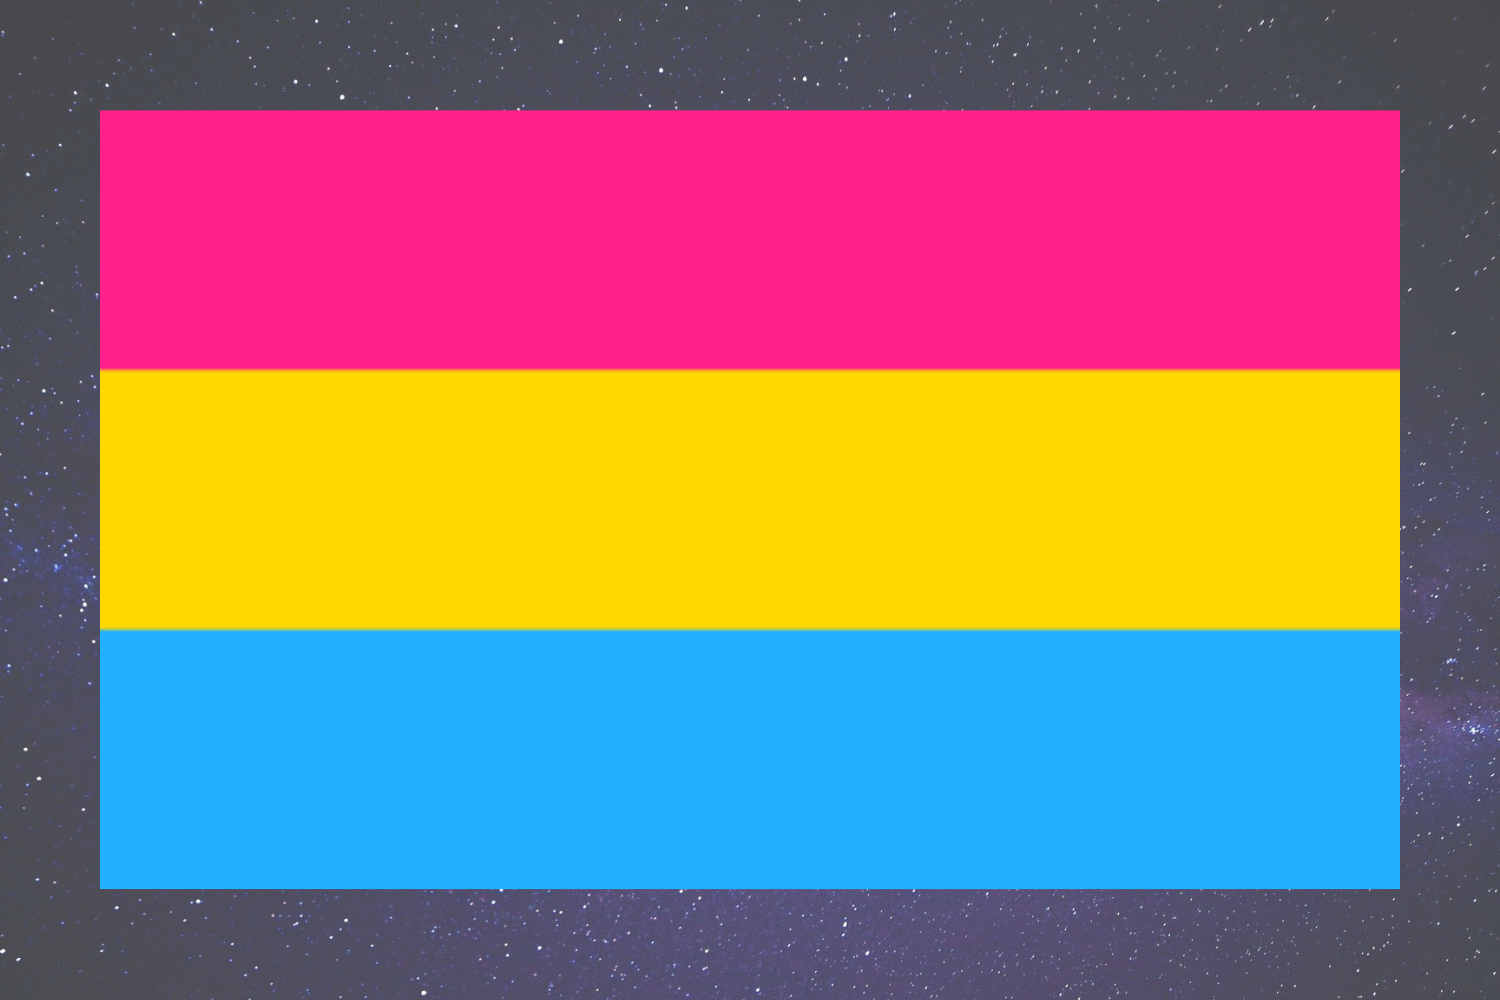 The Pansexual Flag - A flag with 3 horizontal stripes: top to bottom: pink, yellow, and blue. The pink represents attraction to women. The yellow represents attraction to nonbinary folks. The blue represents attraction to men.